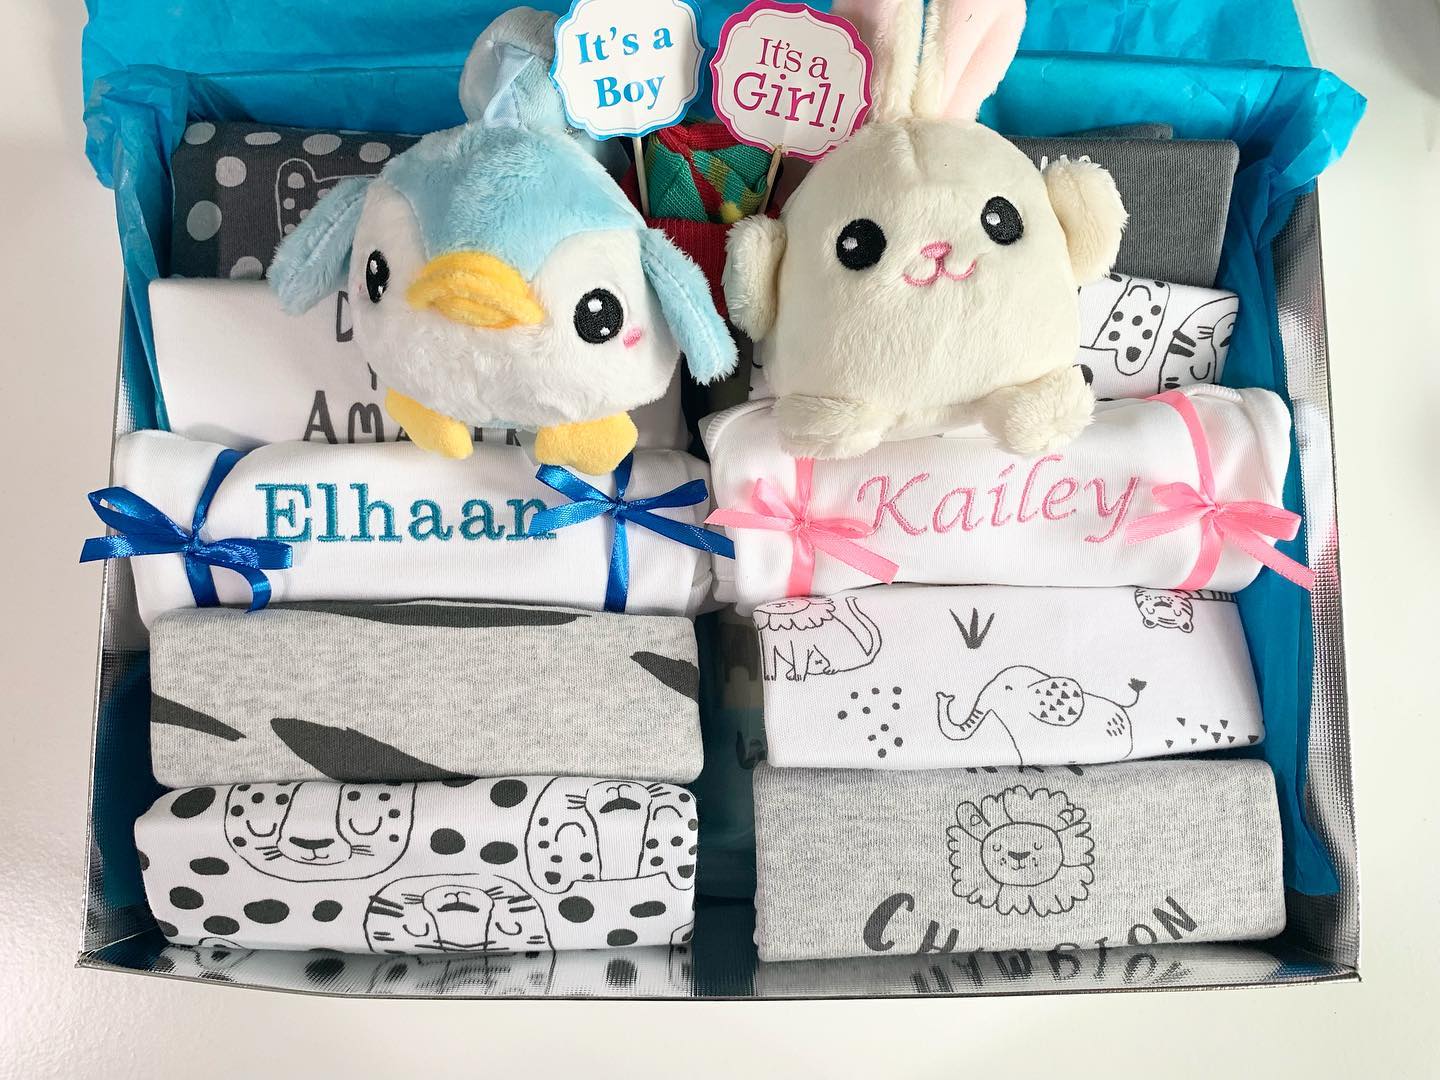 Customised baby gifts - hampers for any genders for twins